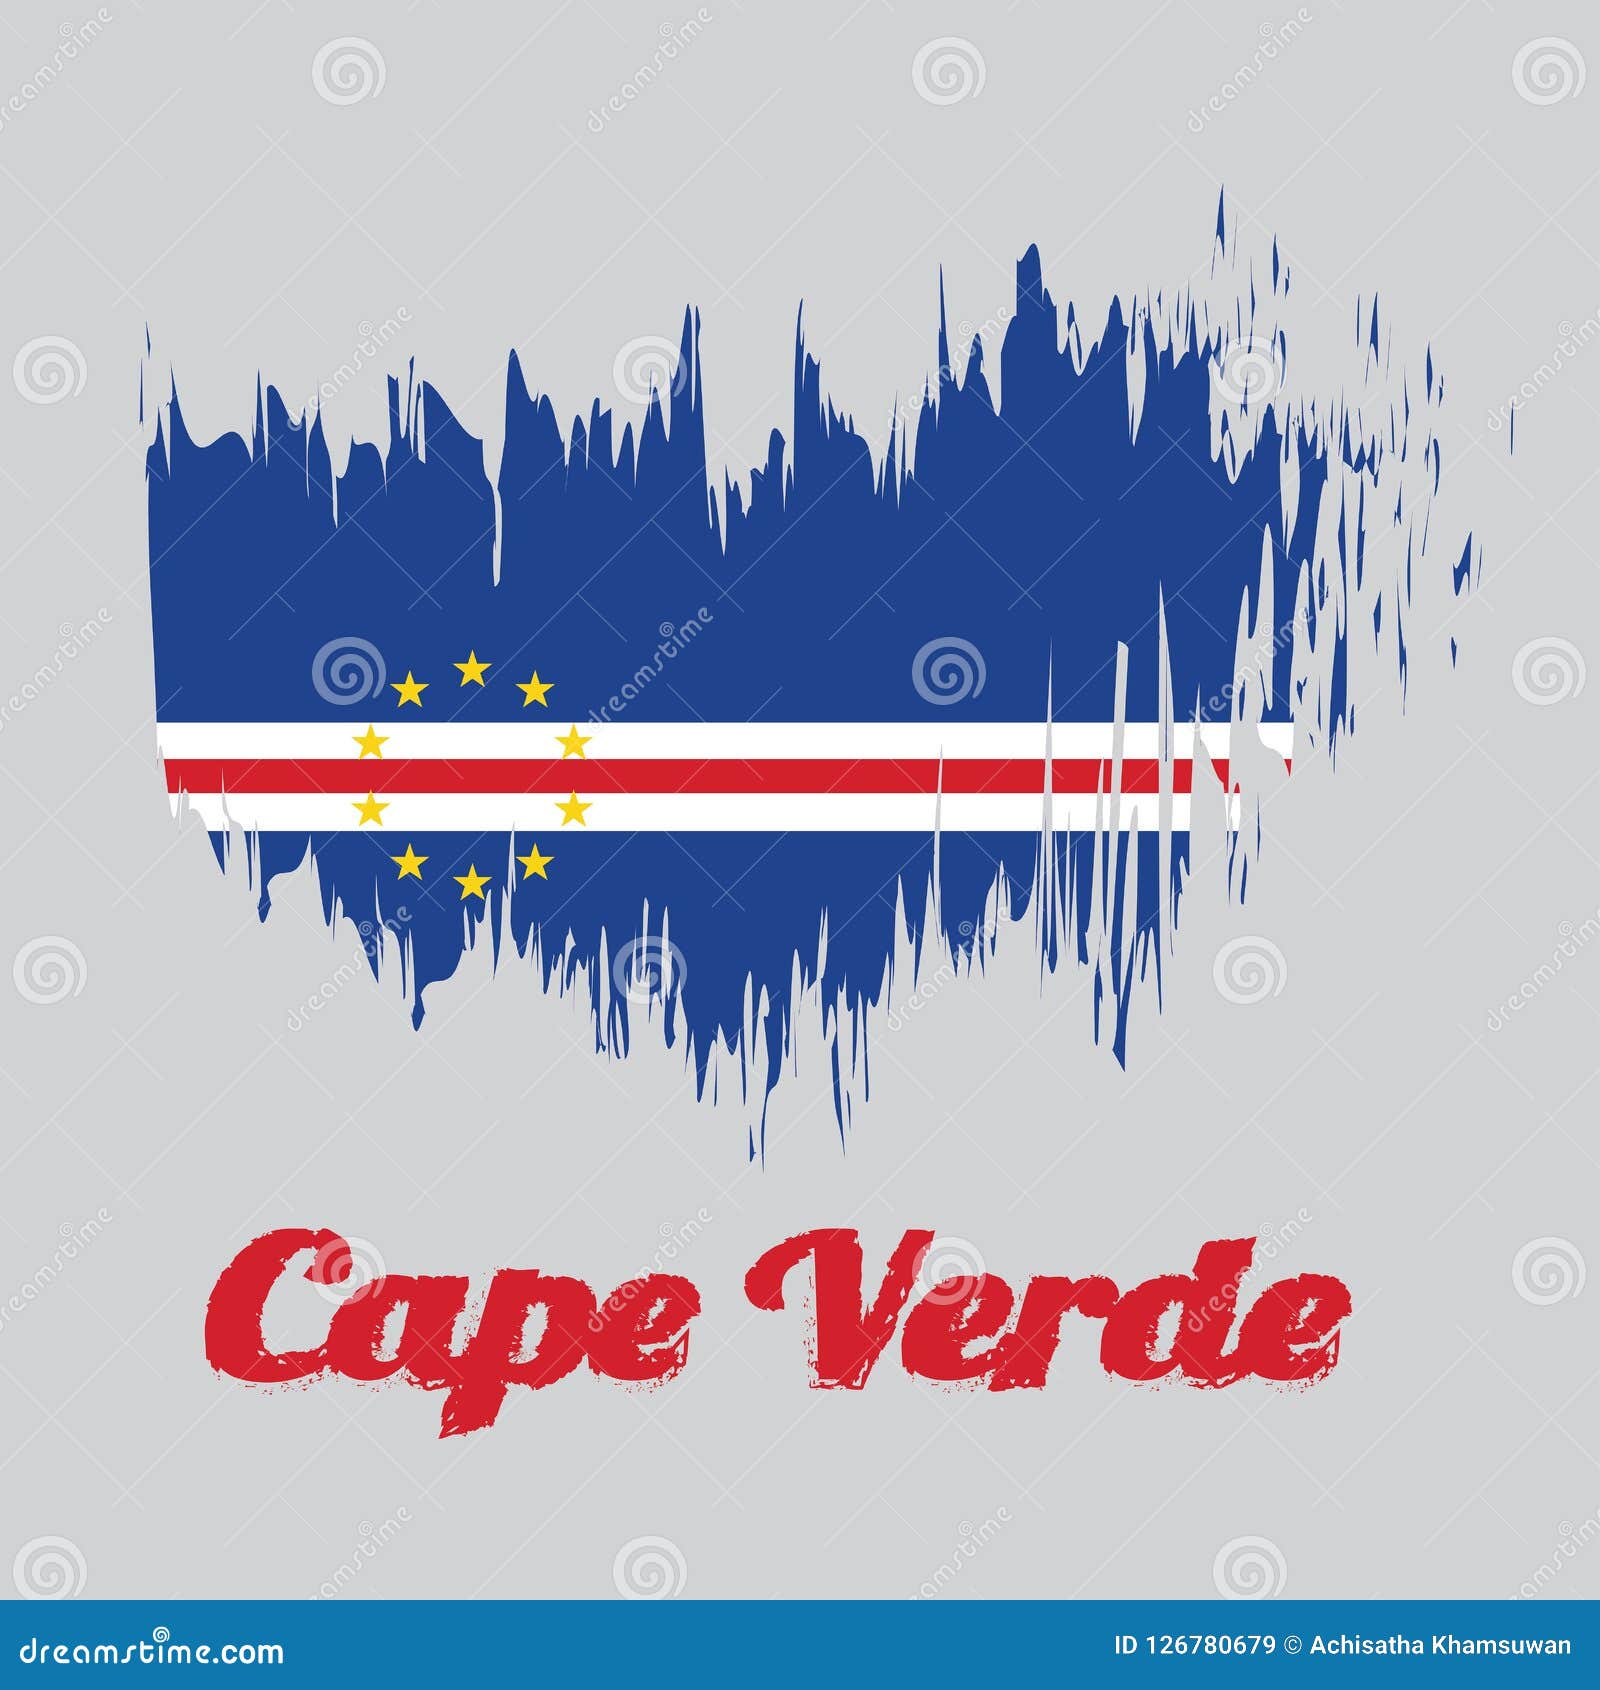 brush style color flag of cape verde, blue white and red color with the circle of ten star. with text cape verde.